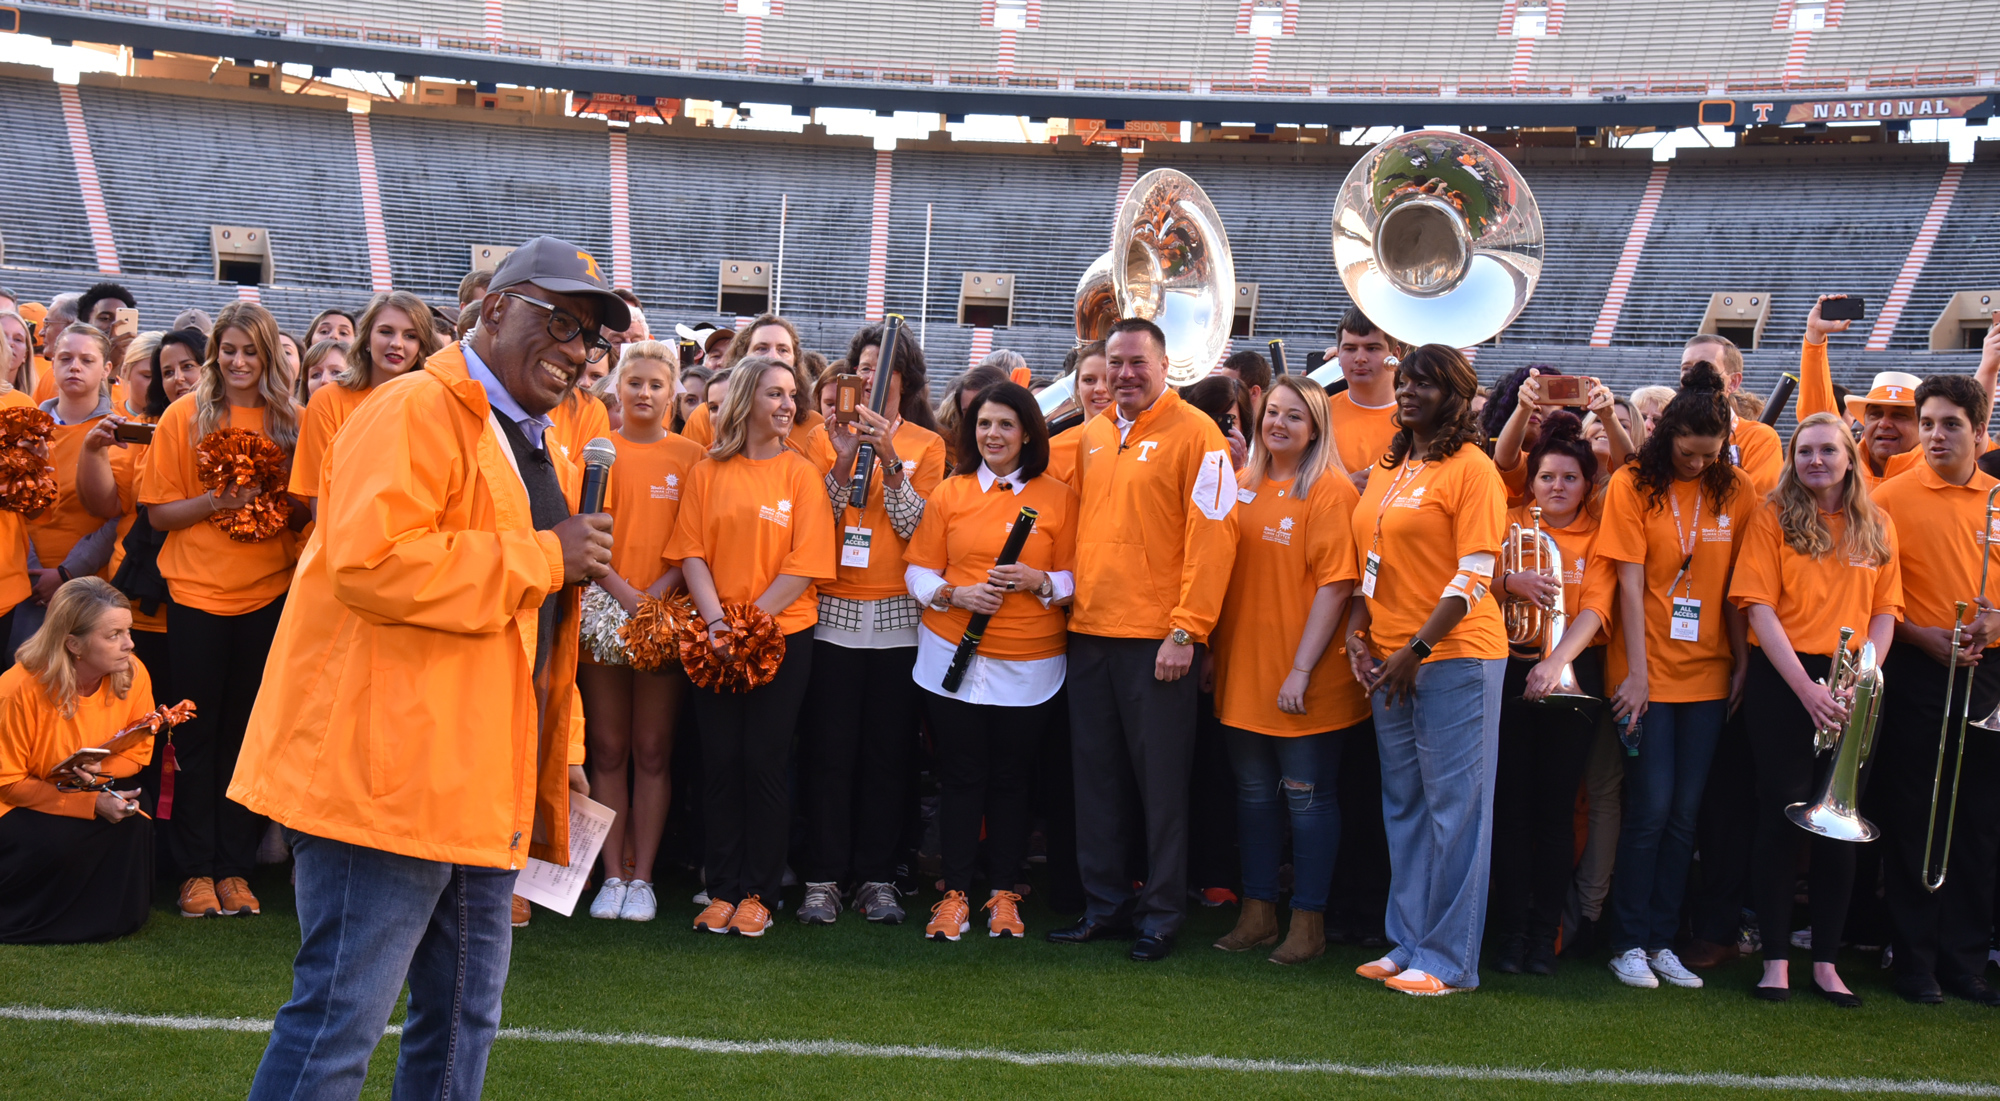 Al Roker hosts the Today Show at Neyland Stadium during a world recordbreaking event on March 29, 2017.